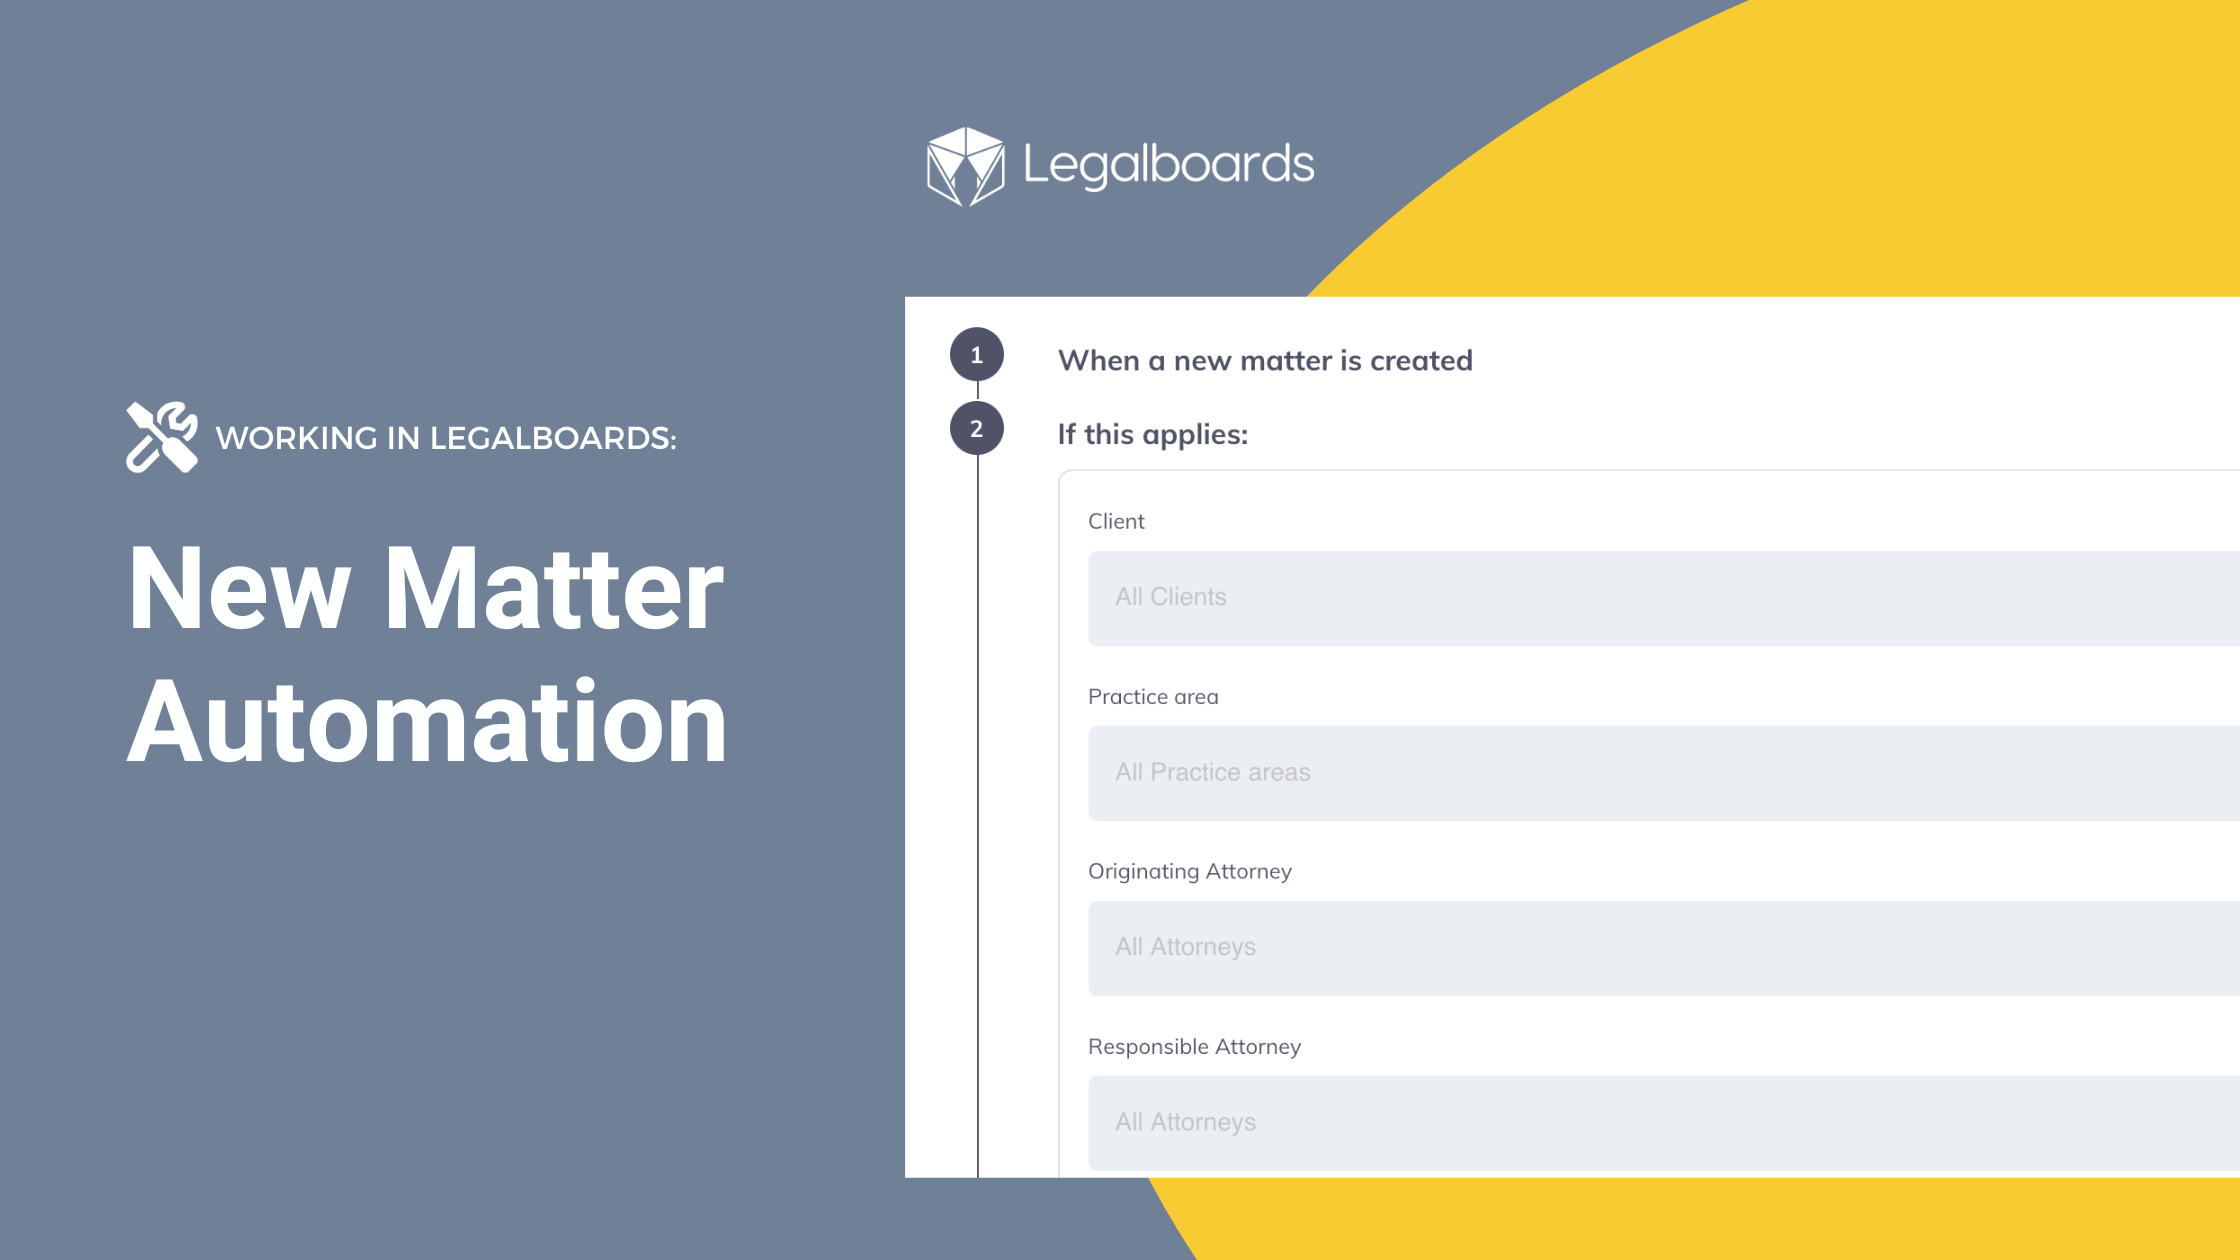 Working in Legalboards: New Matter Automation